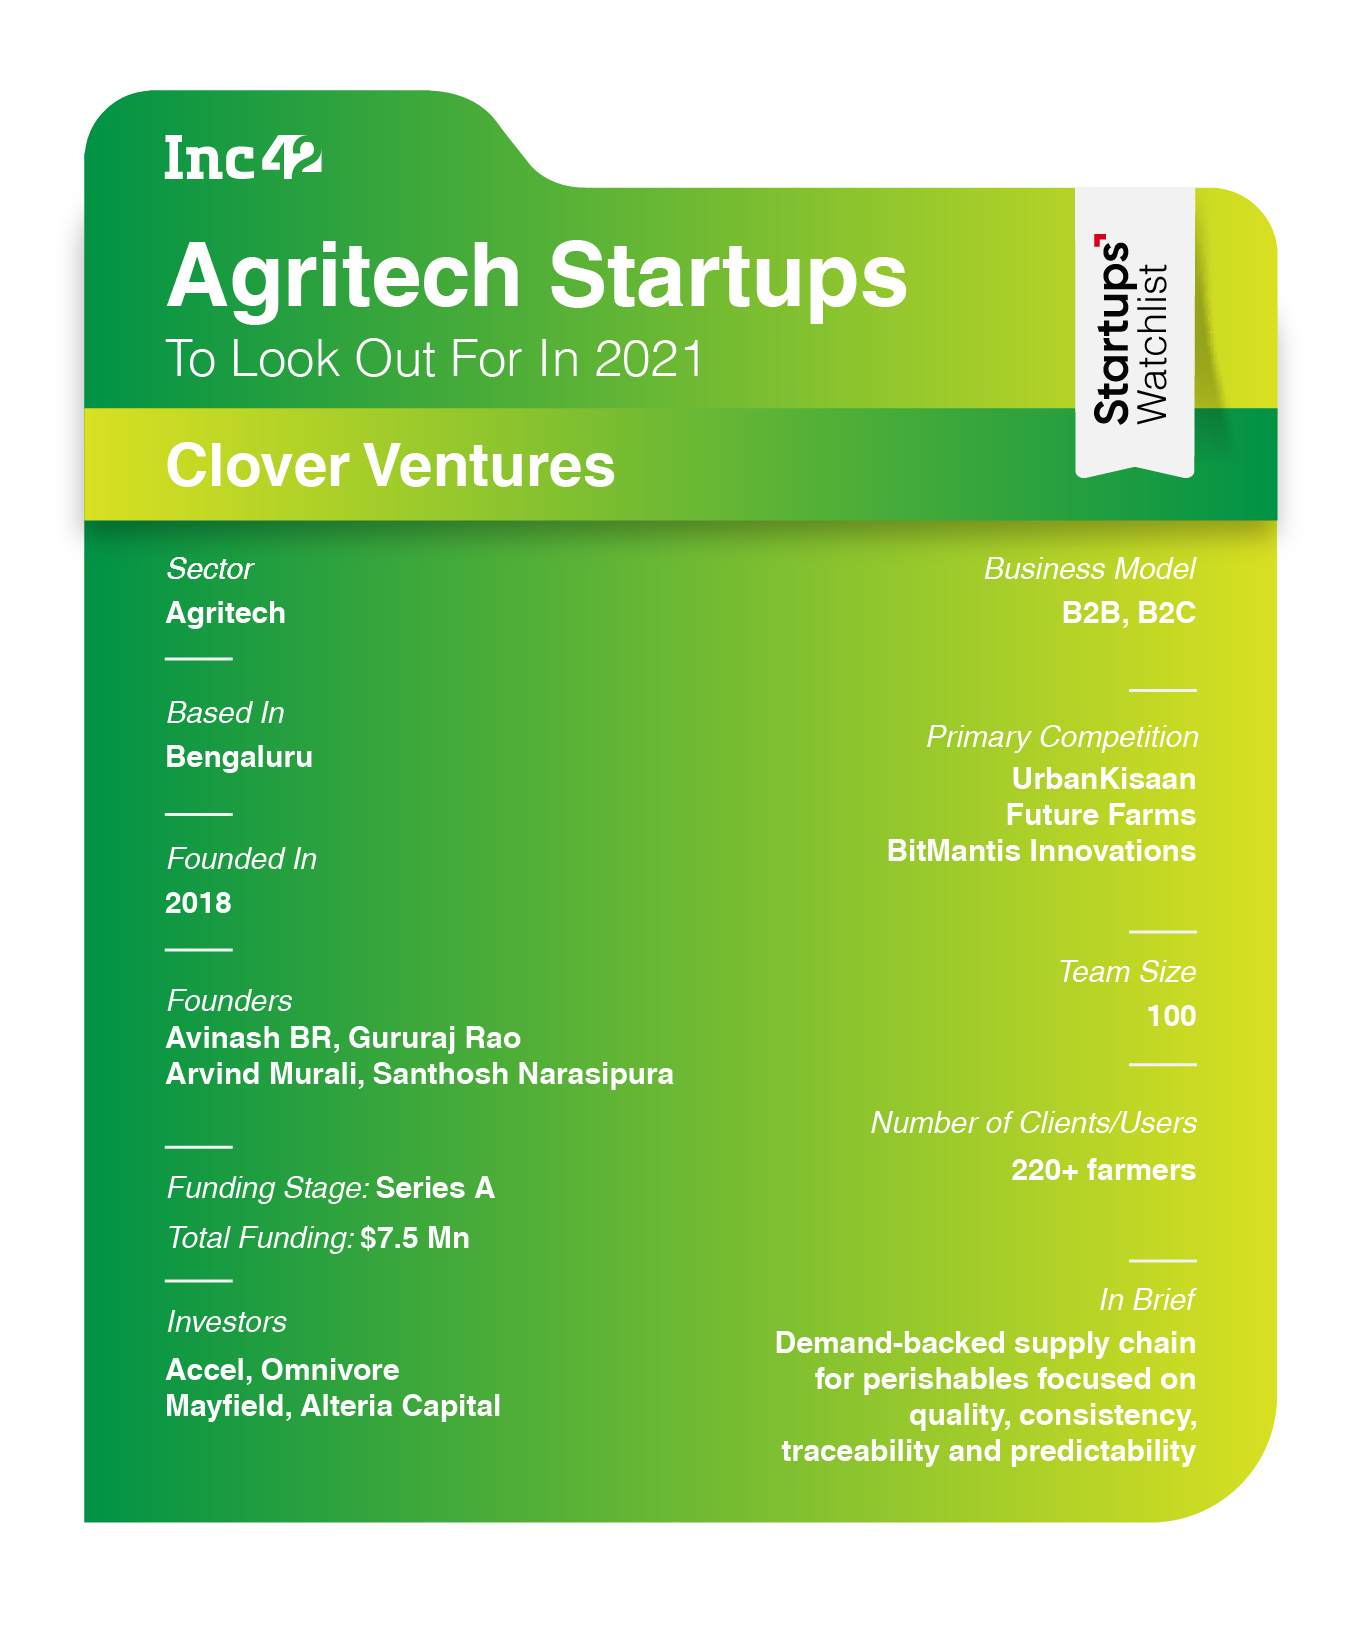 Clover Ventures: Offers Full-Stack Agronomy Solutions To Urban & Peri-Urban Farmers 